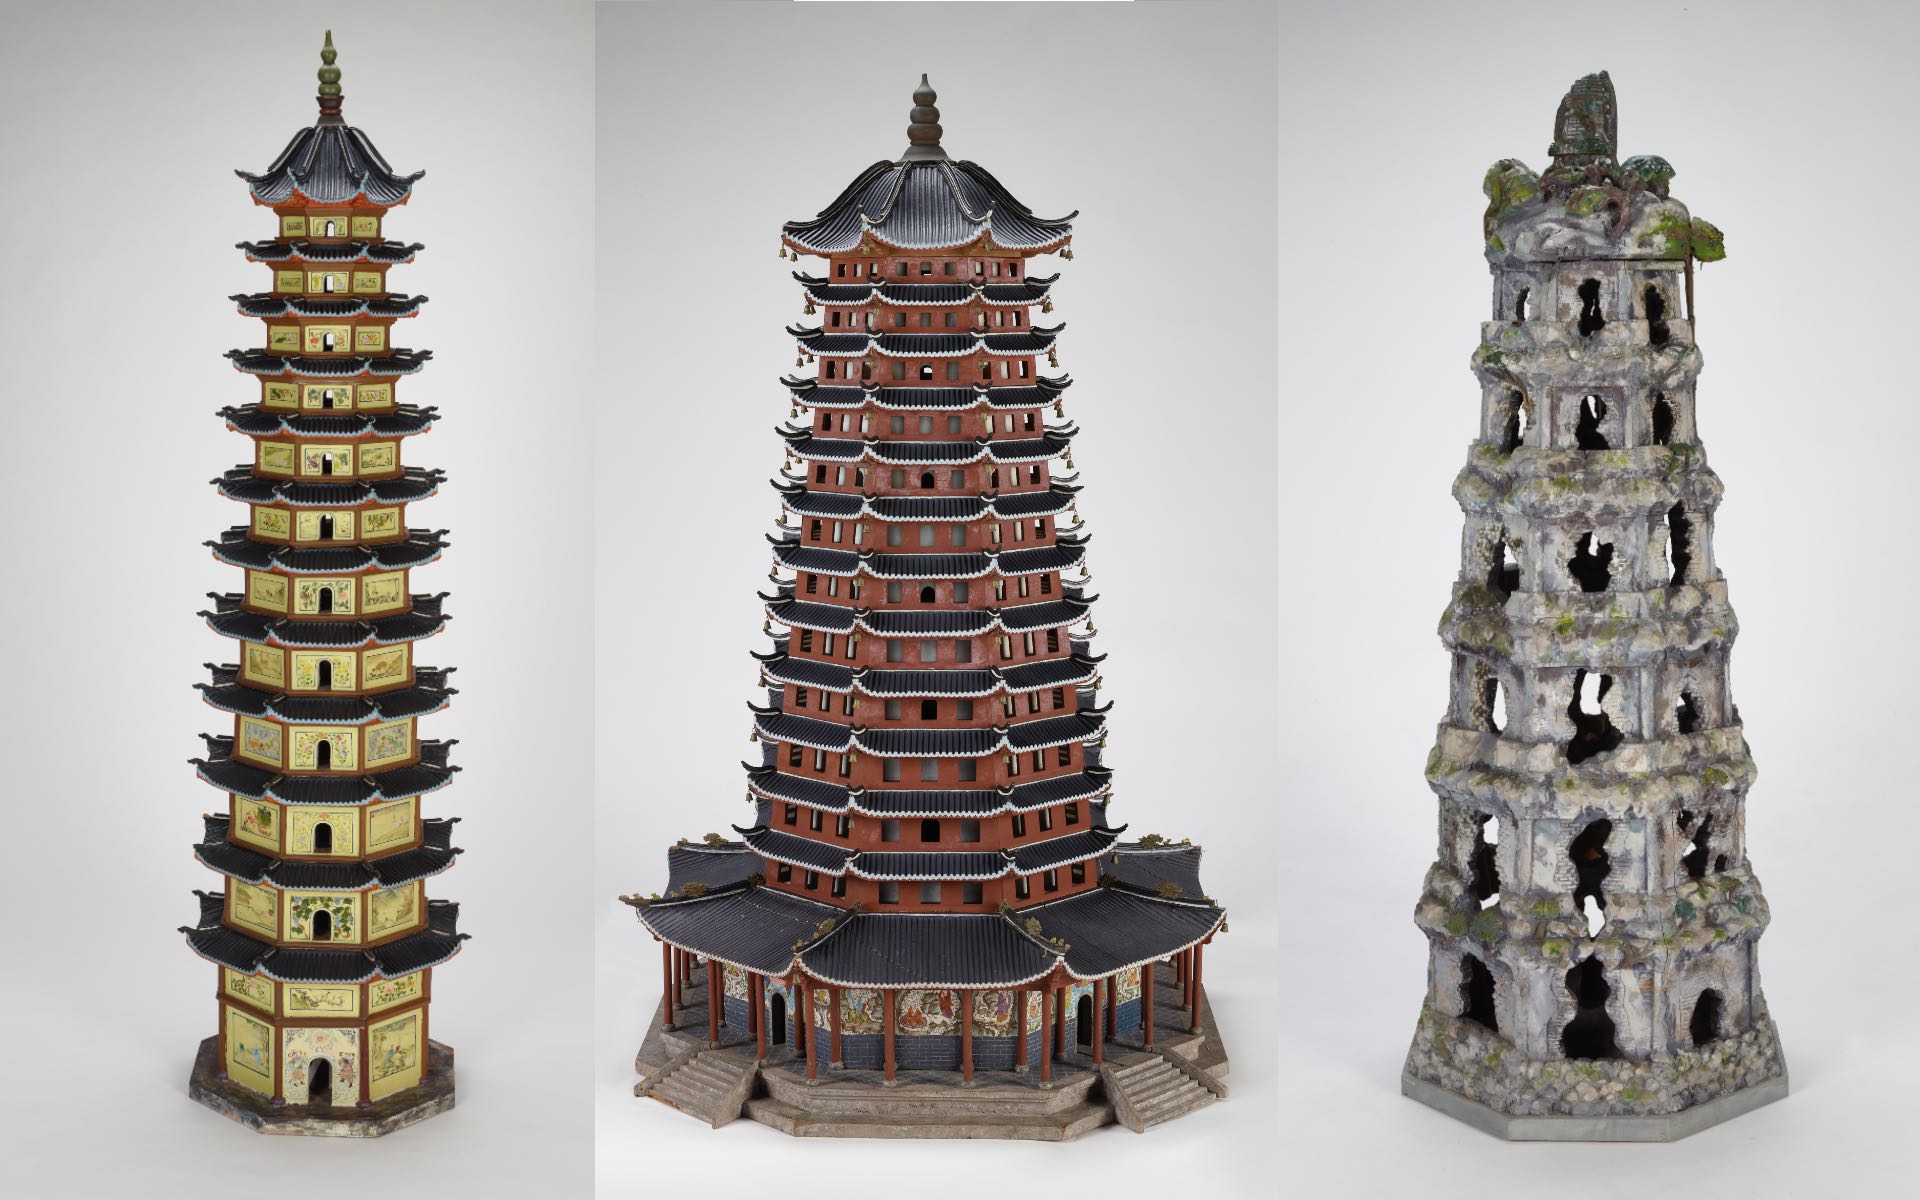 , Special collection of hand-carved model pagodas on exhibition now at Asian Civilisations Museum